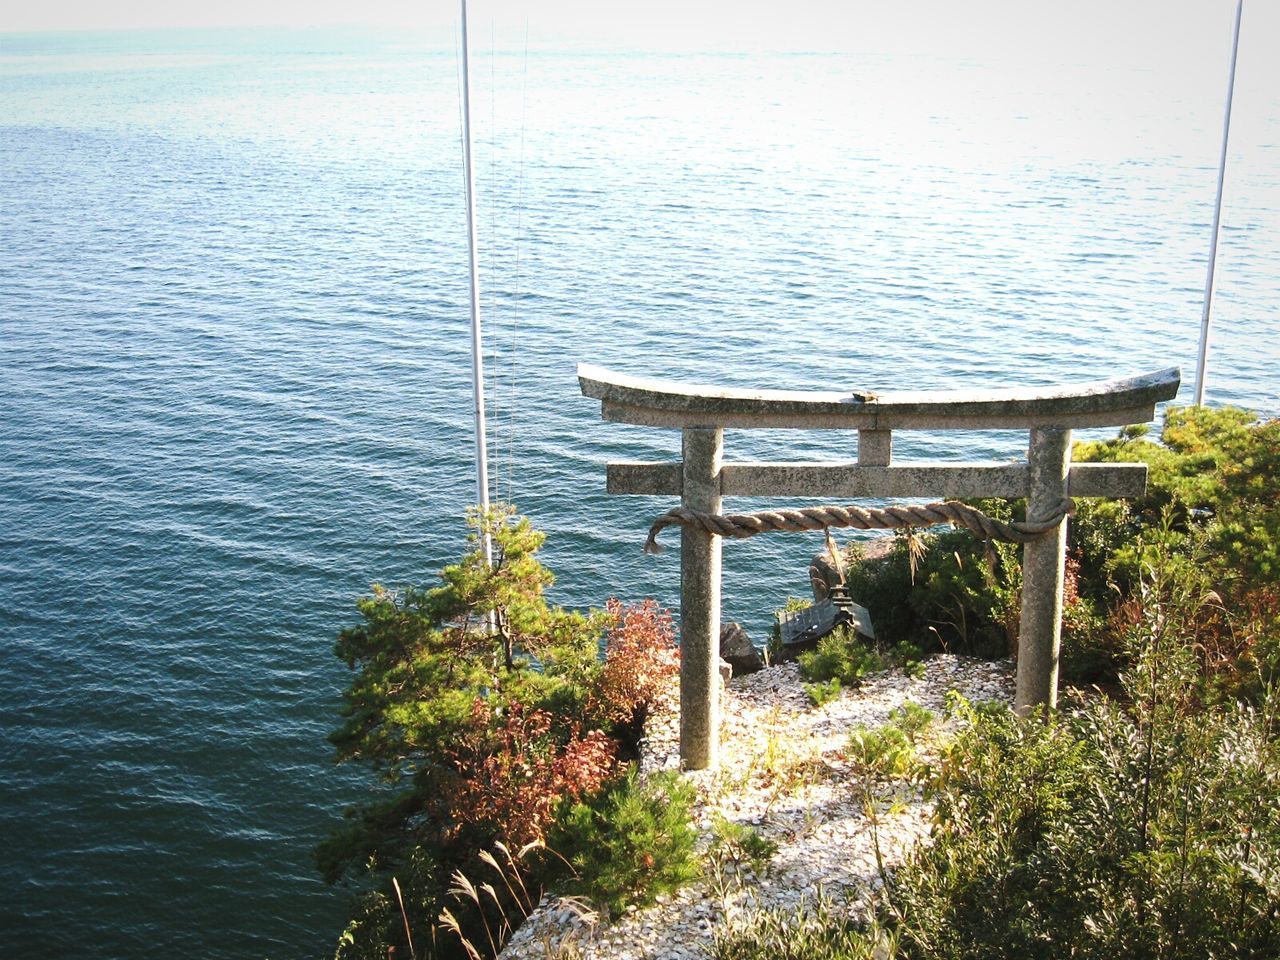 View of torii gate structure at coast